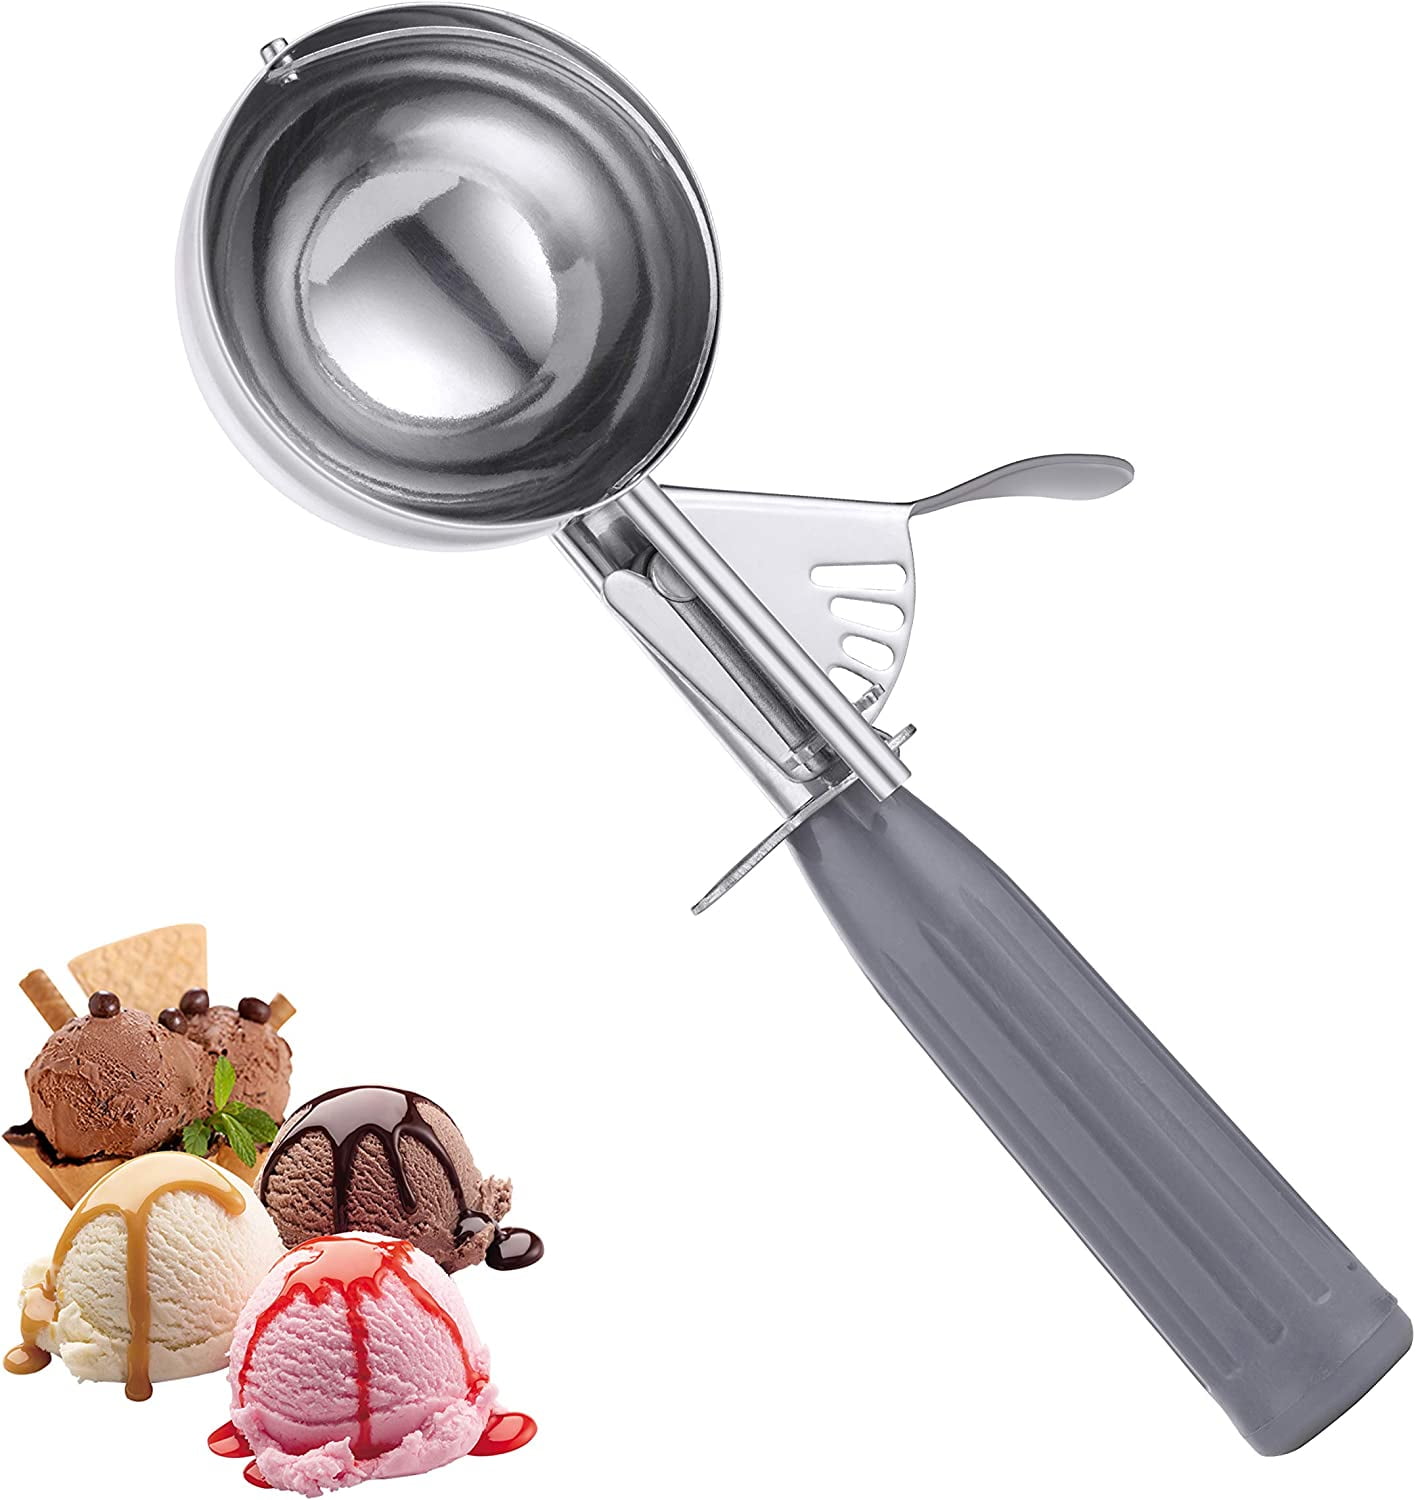 Dengjunhu Ice Cream Scoop, Stainless Steel Ice Cream Scooper with Trigger  Release, Large/Medium/Small Cookie Scooper for Baking, Cookie Scoops for  Baking with Cookie Dough Scoop 